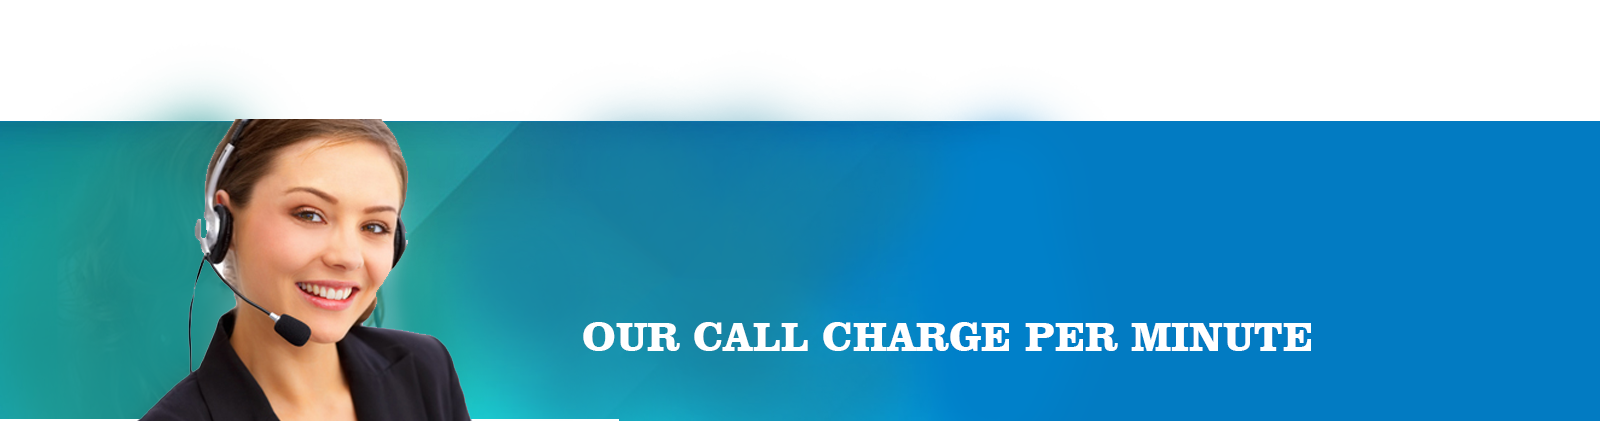 voipdiscount call charges